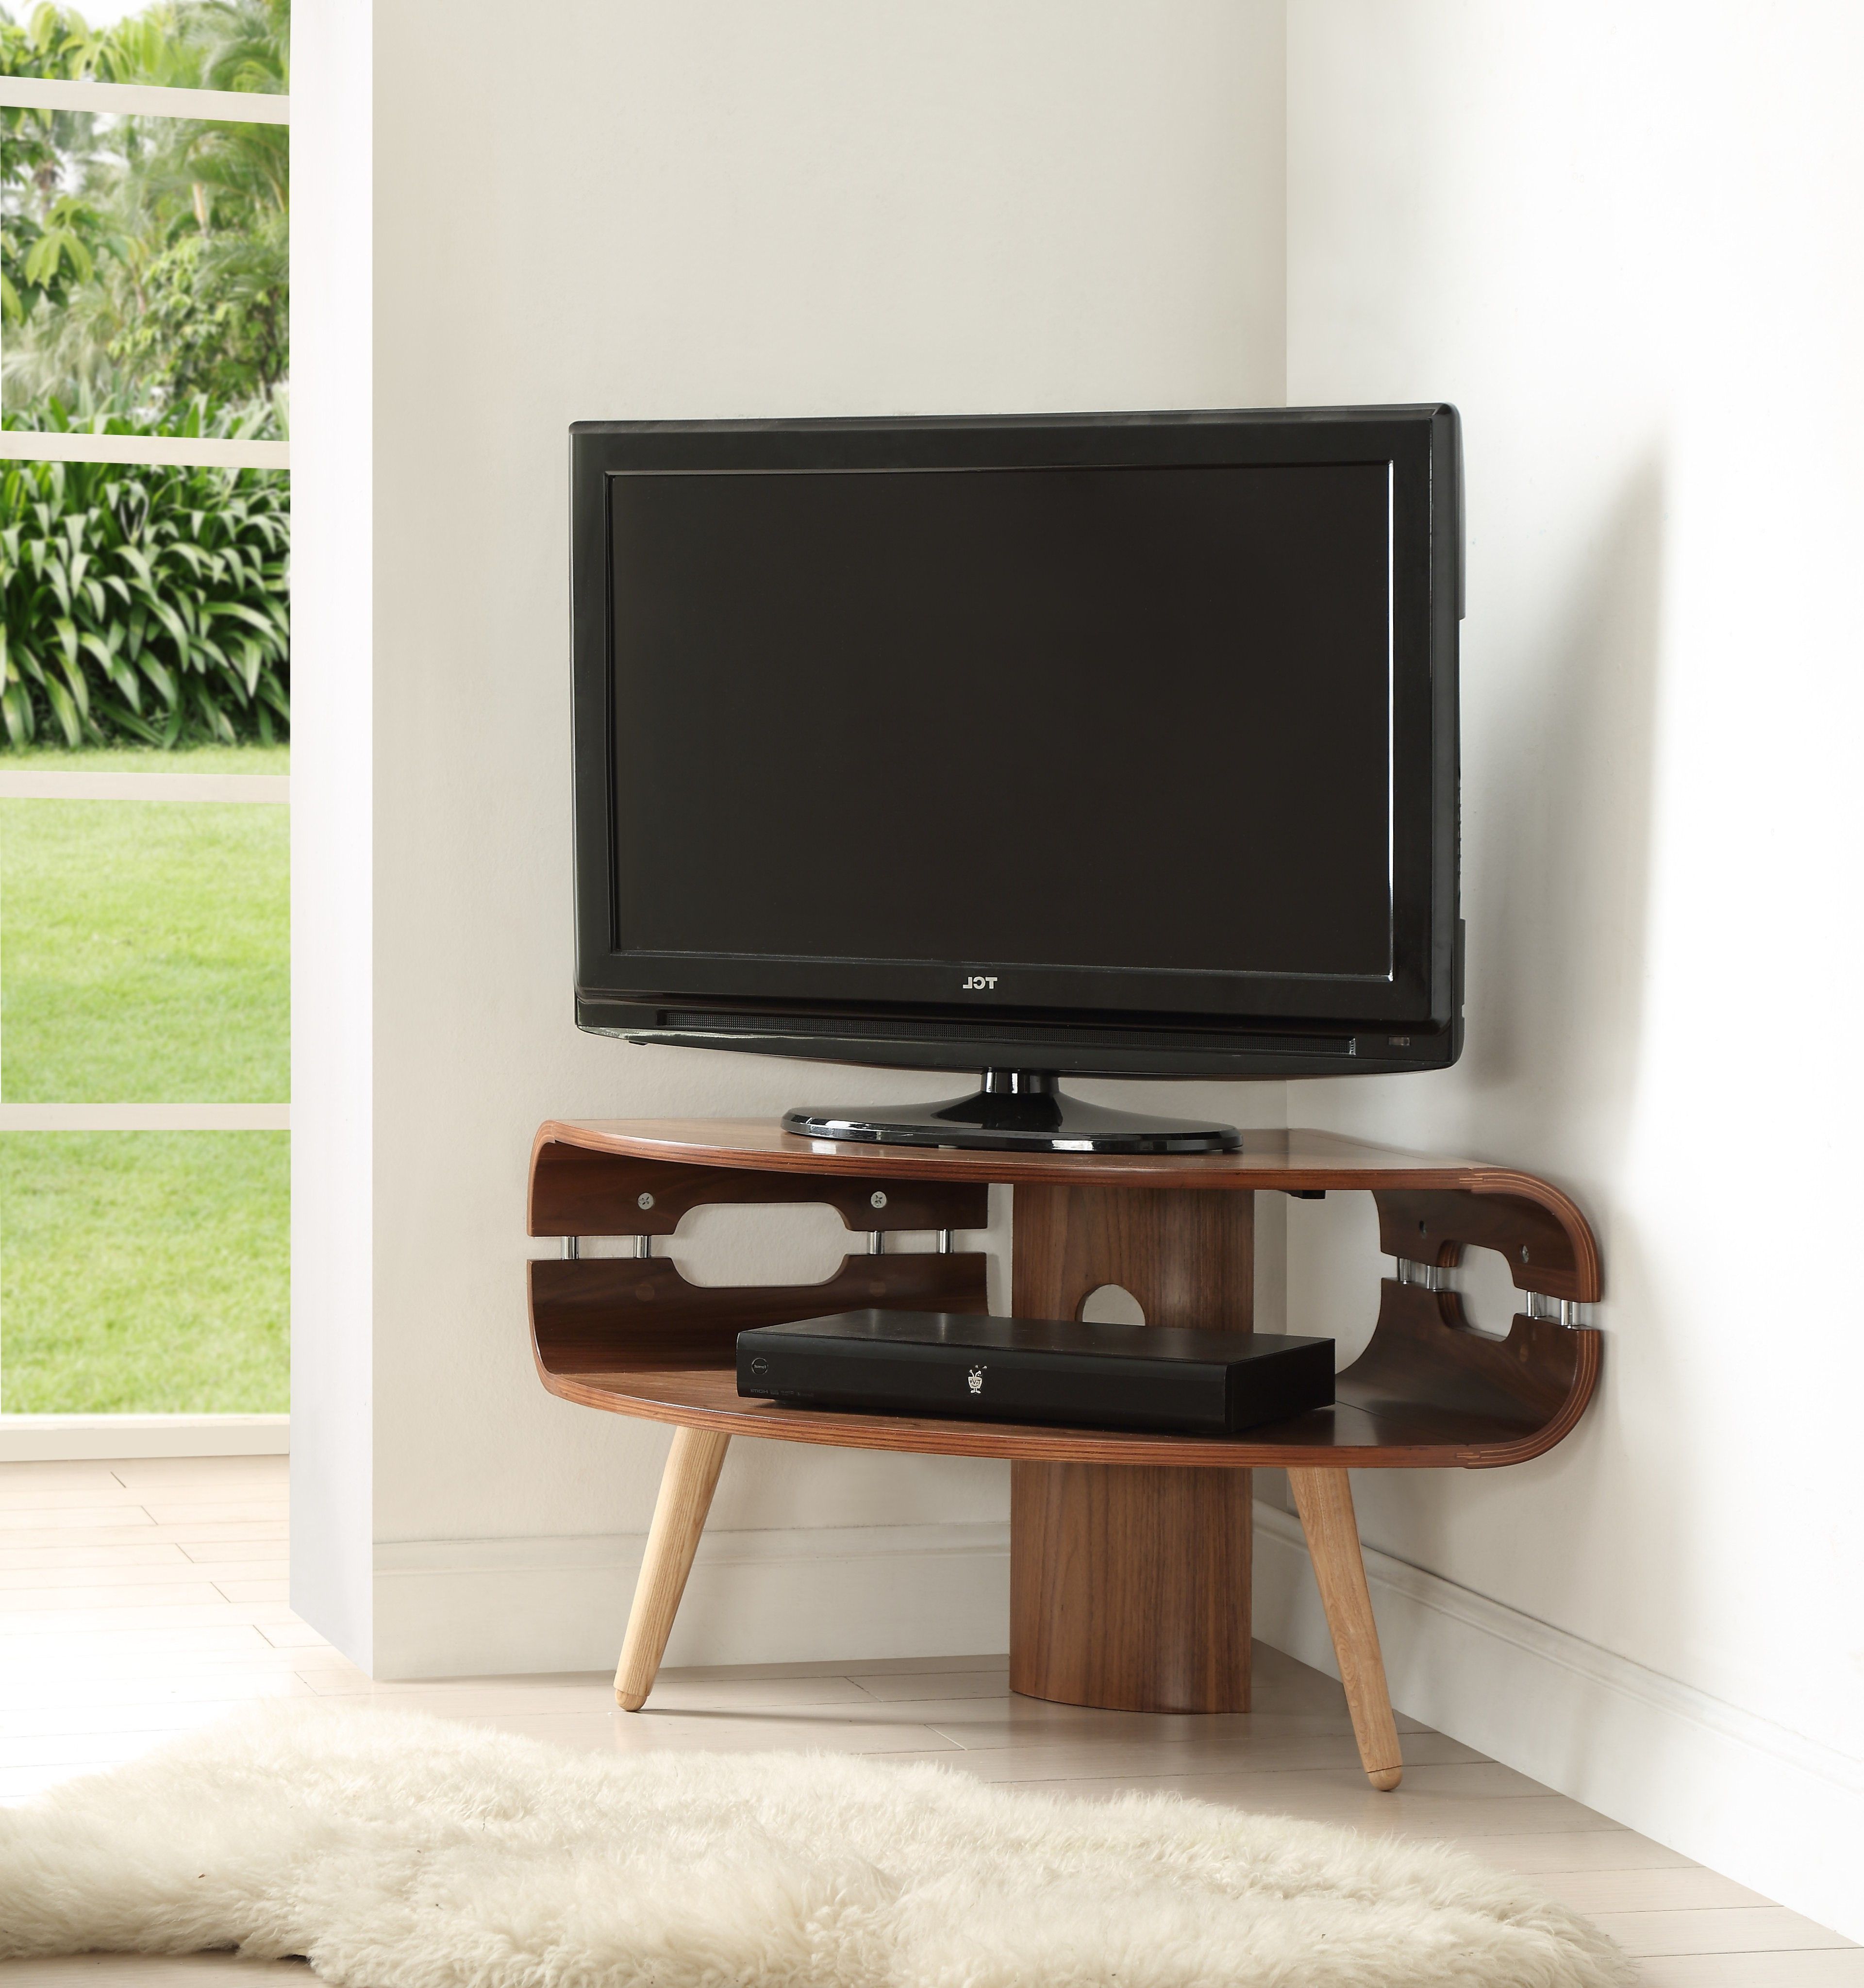 Most Recently Released Jf701 Corner Tv Stand – Cooks With Tv Stands For Corner (View 3 of 20)